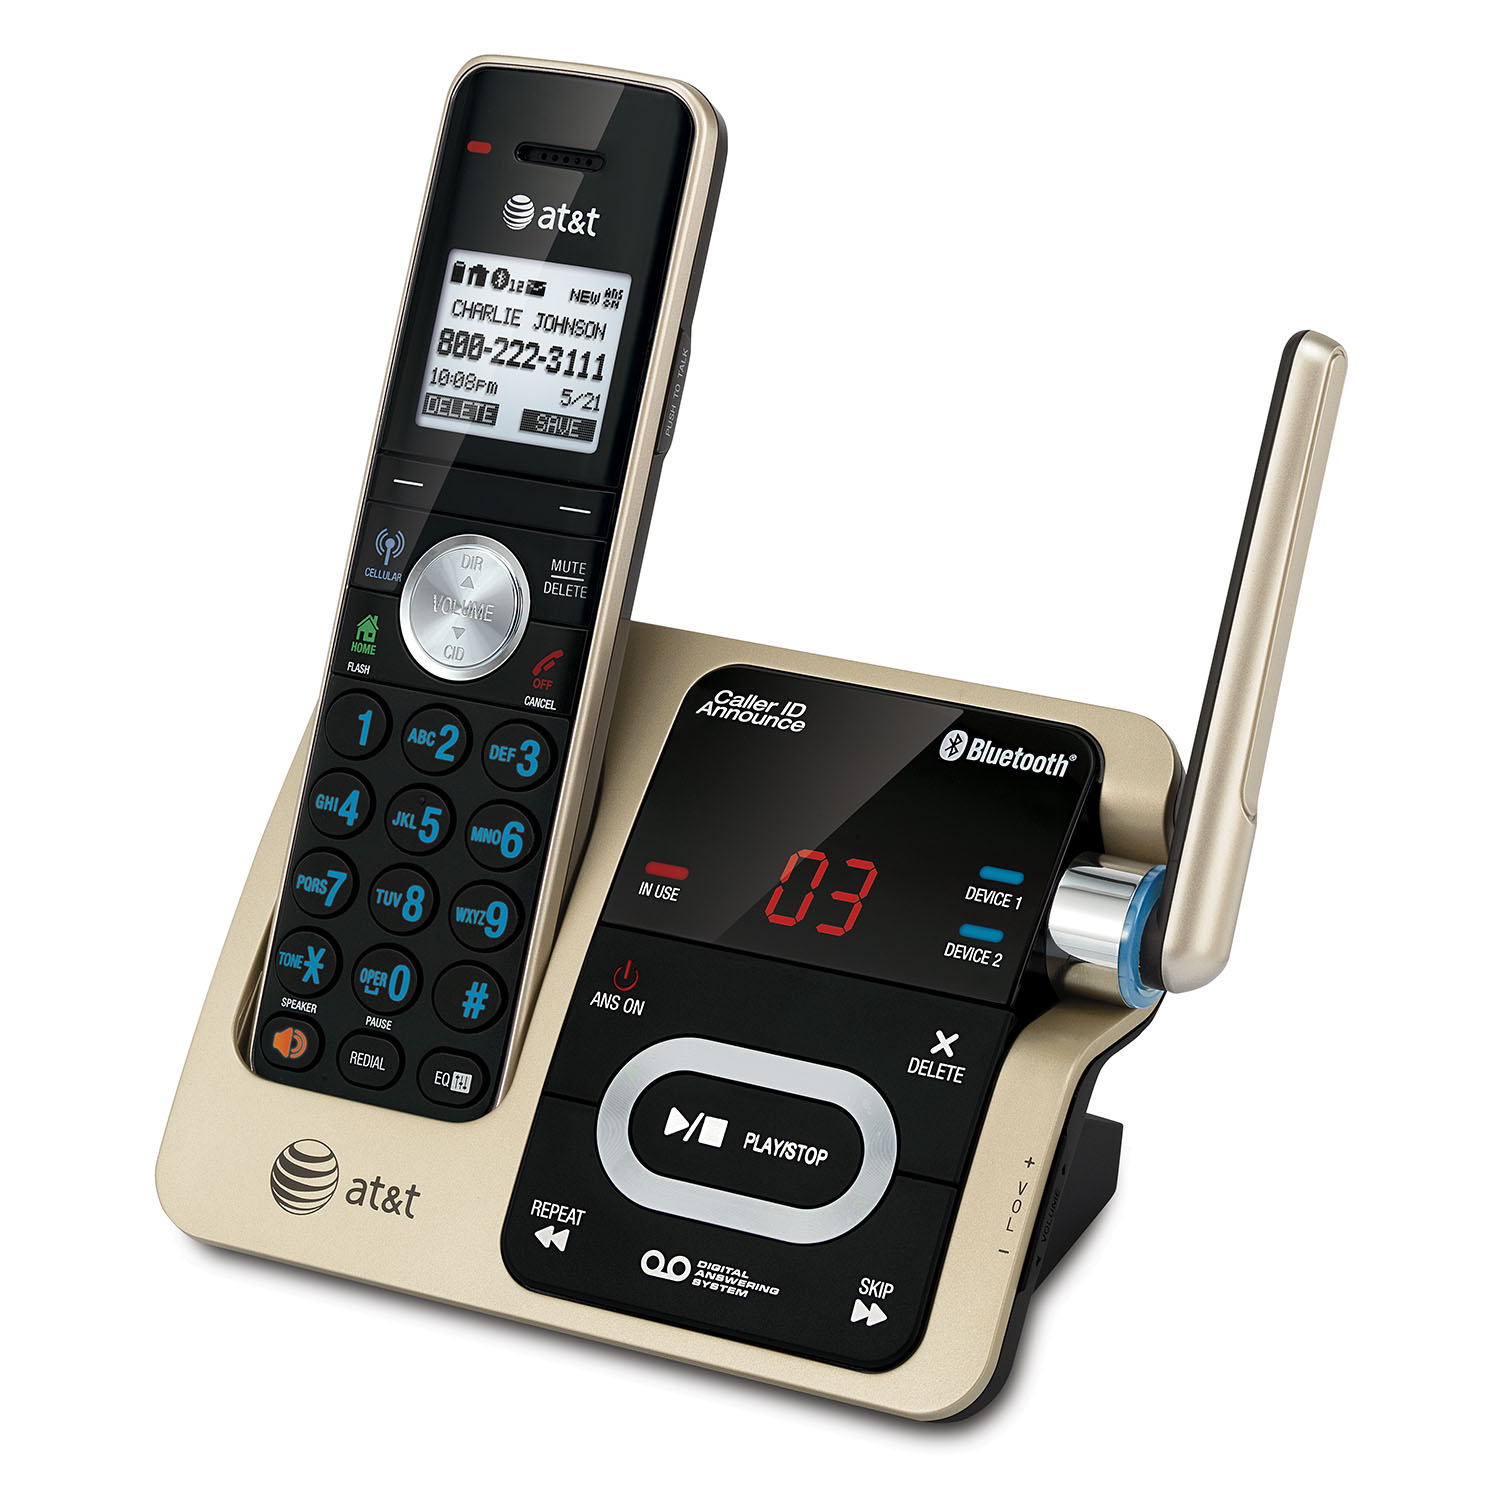 5 handset Connect to Cell™ answering system with caller ID/call waiting - view 2